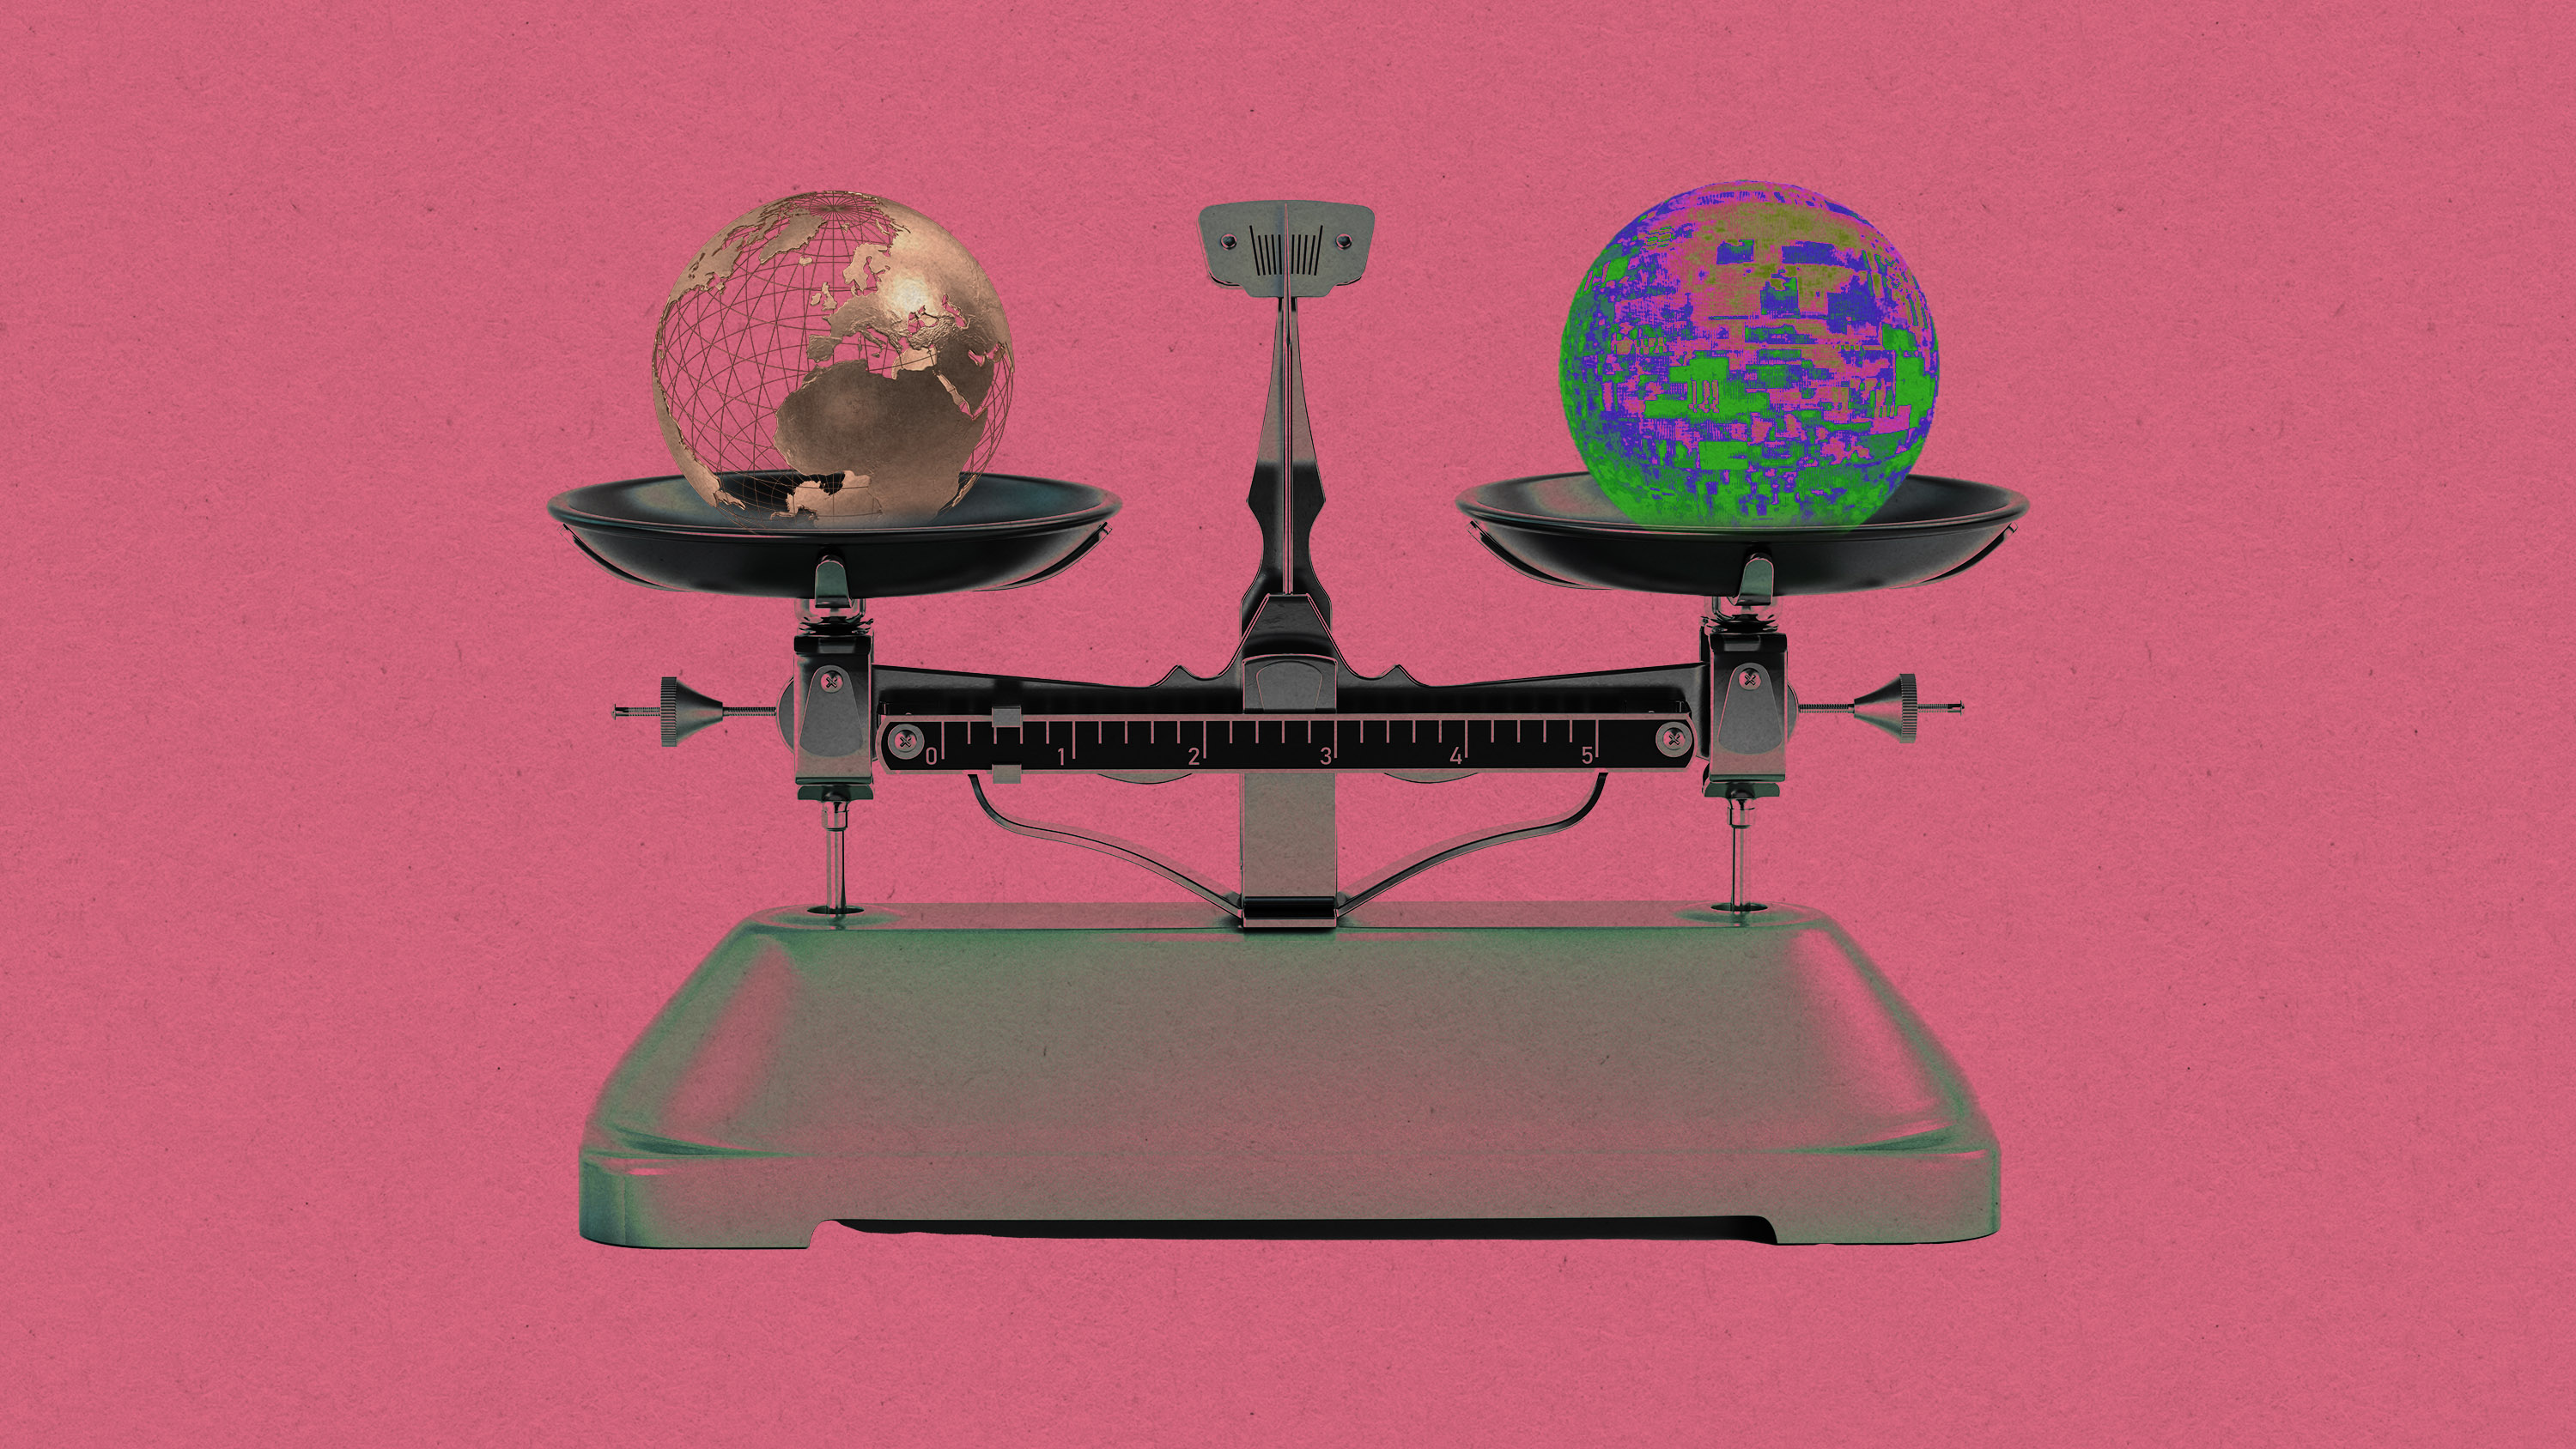 balance scale with a globe and a sphere made of glitch